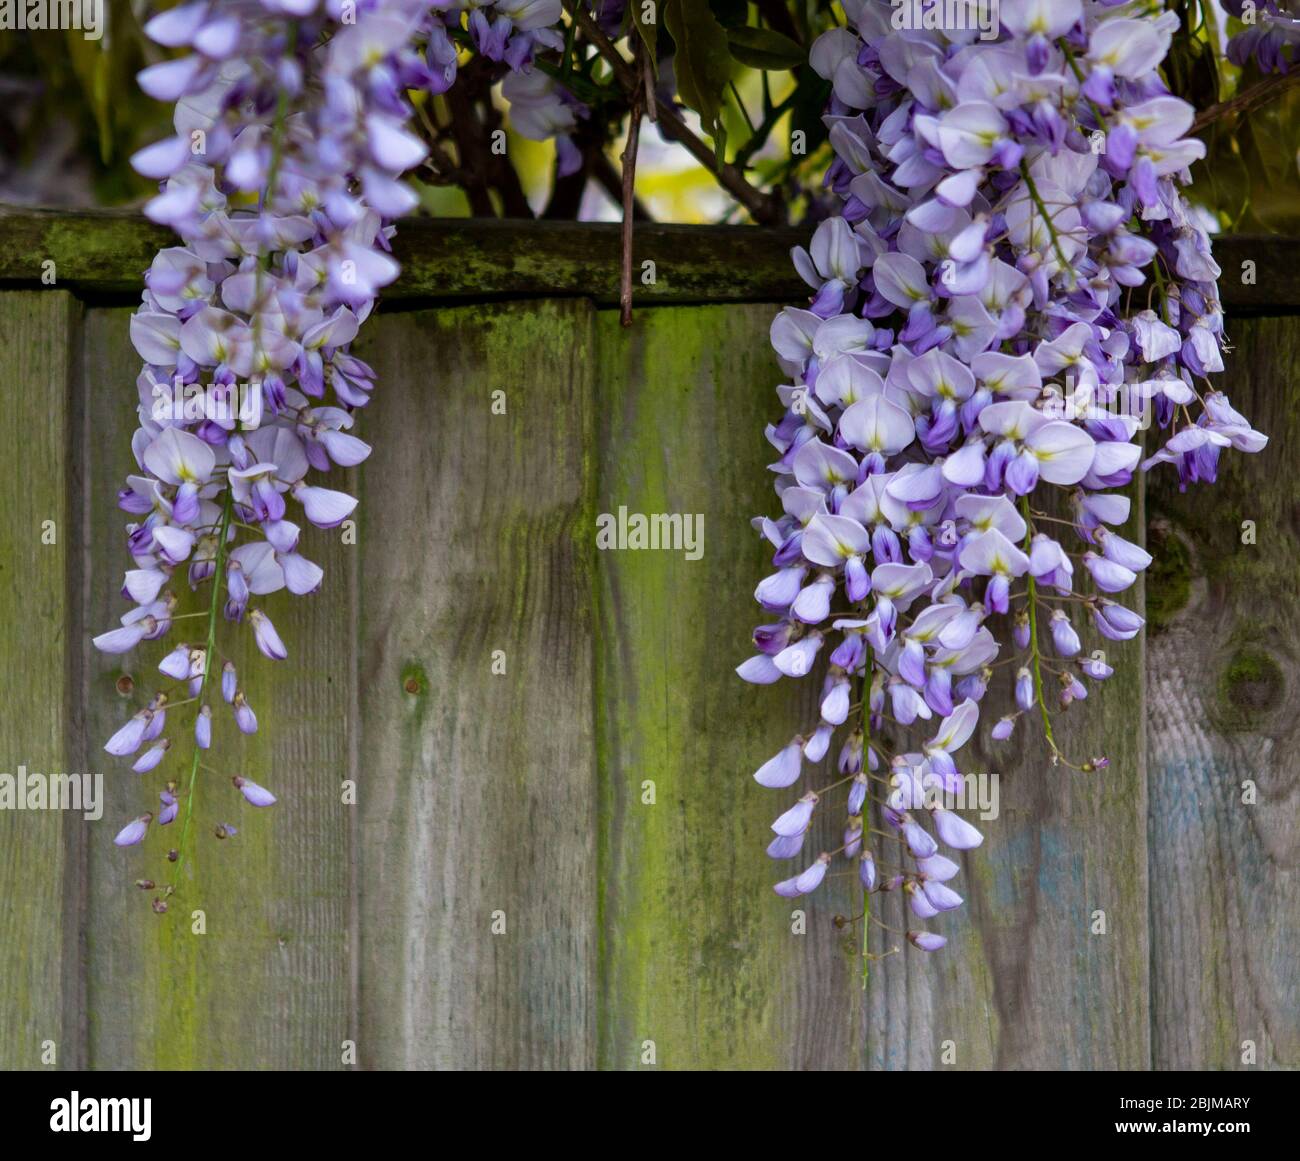 Purple wisteria hanging in front of fence Stock Photo